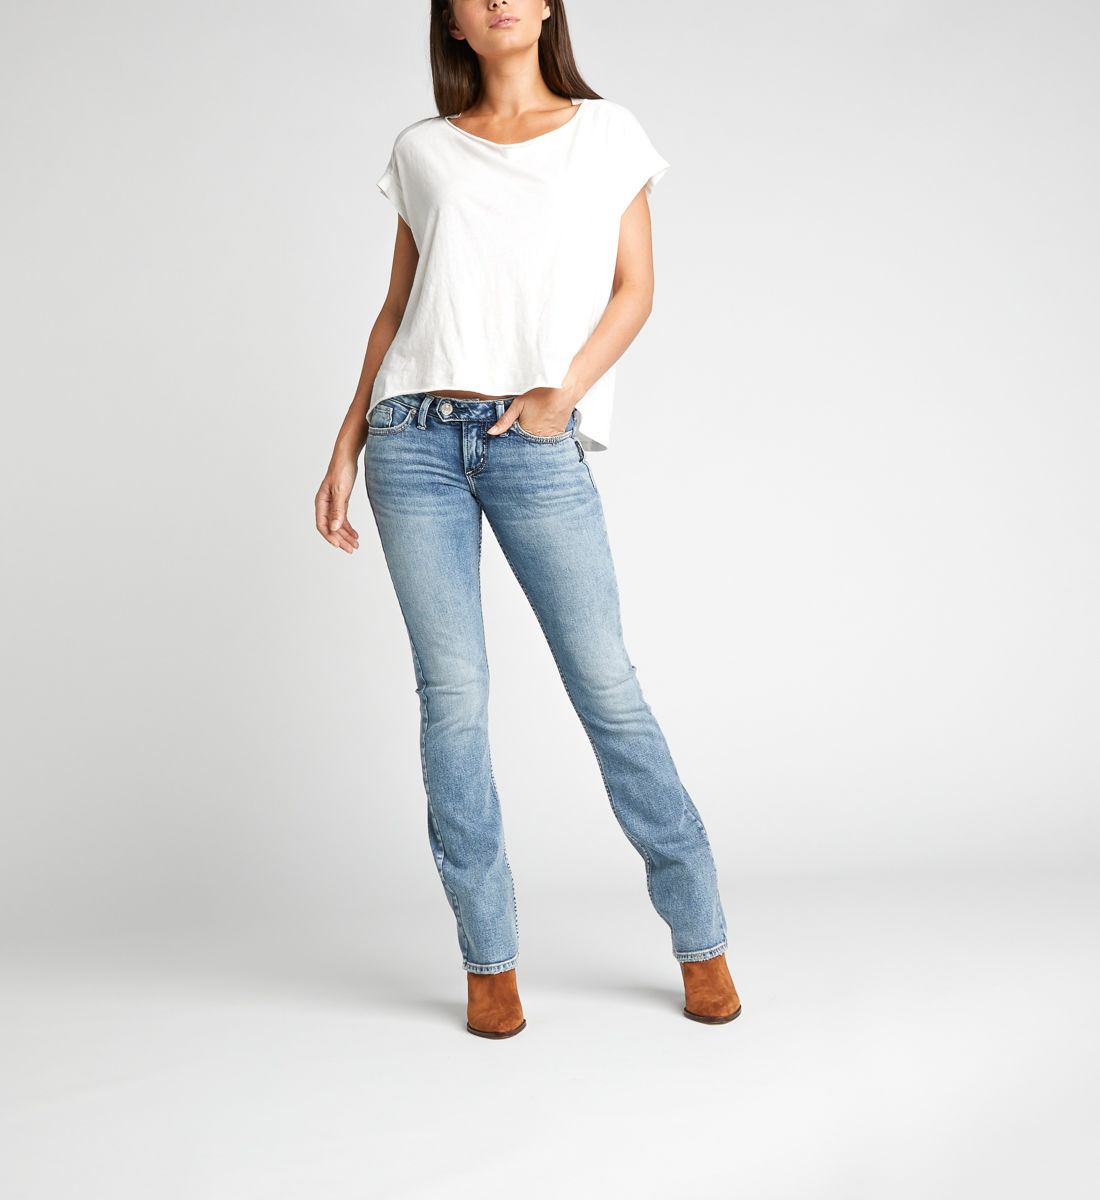 Womens Designer Clothing & Apparel | Silver Jeans